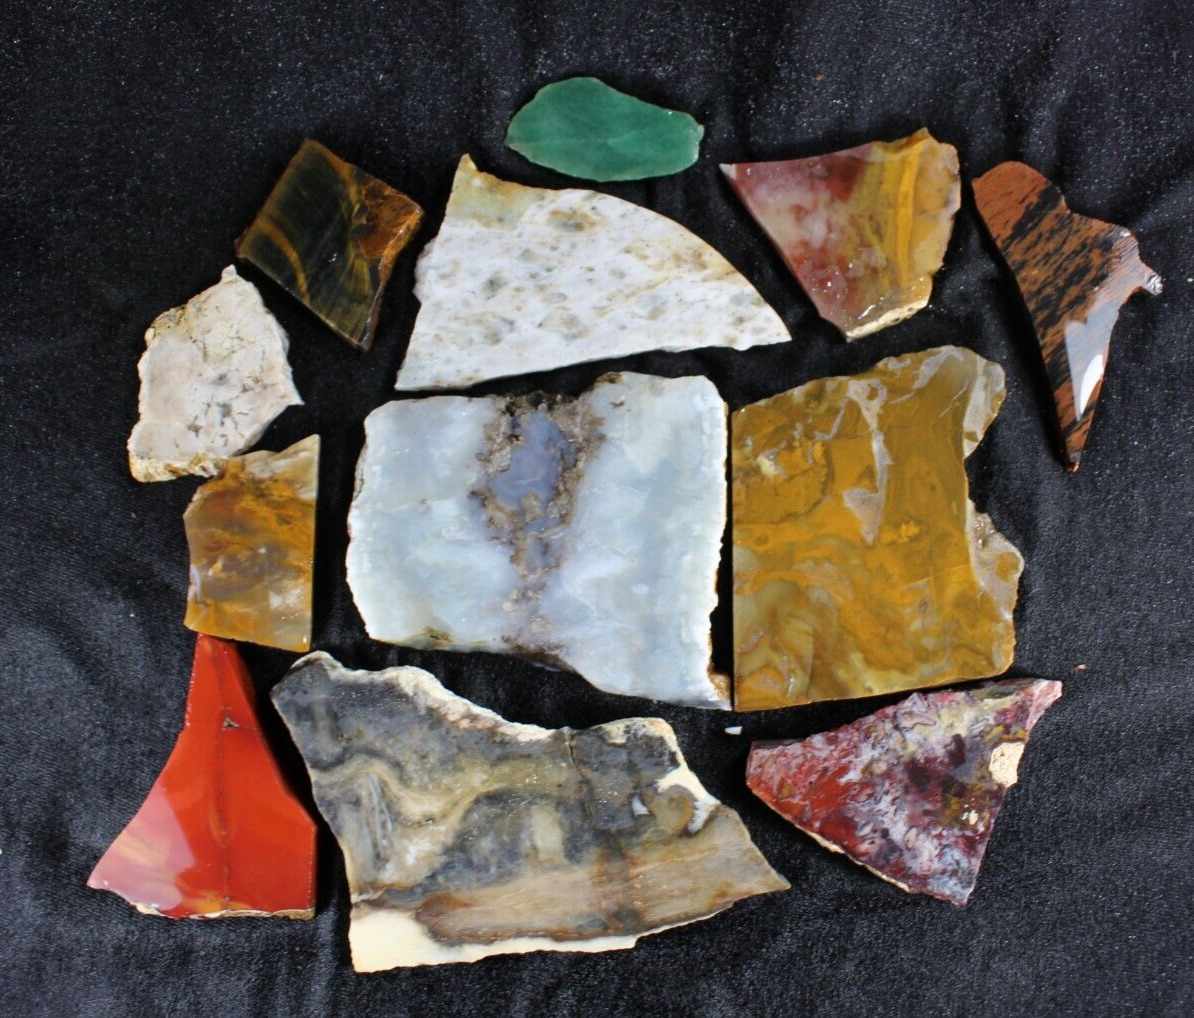 PJ: Mixed Lot of Slabs - Jasper, Agate and More   12 Ozs